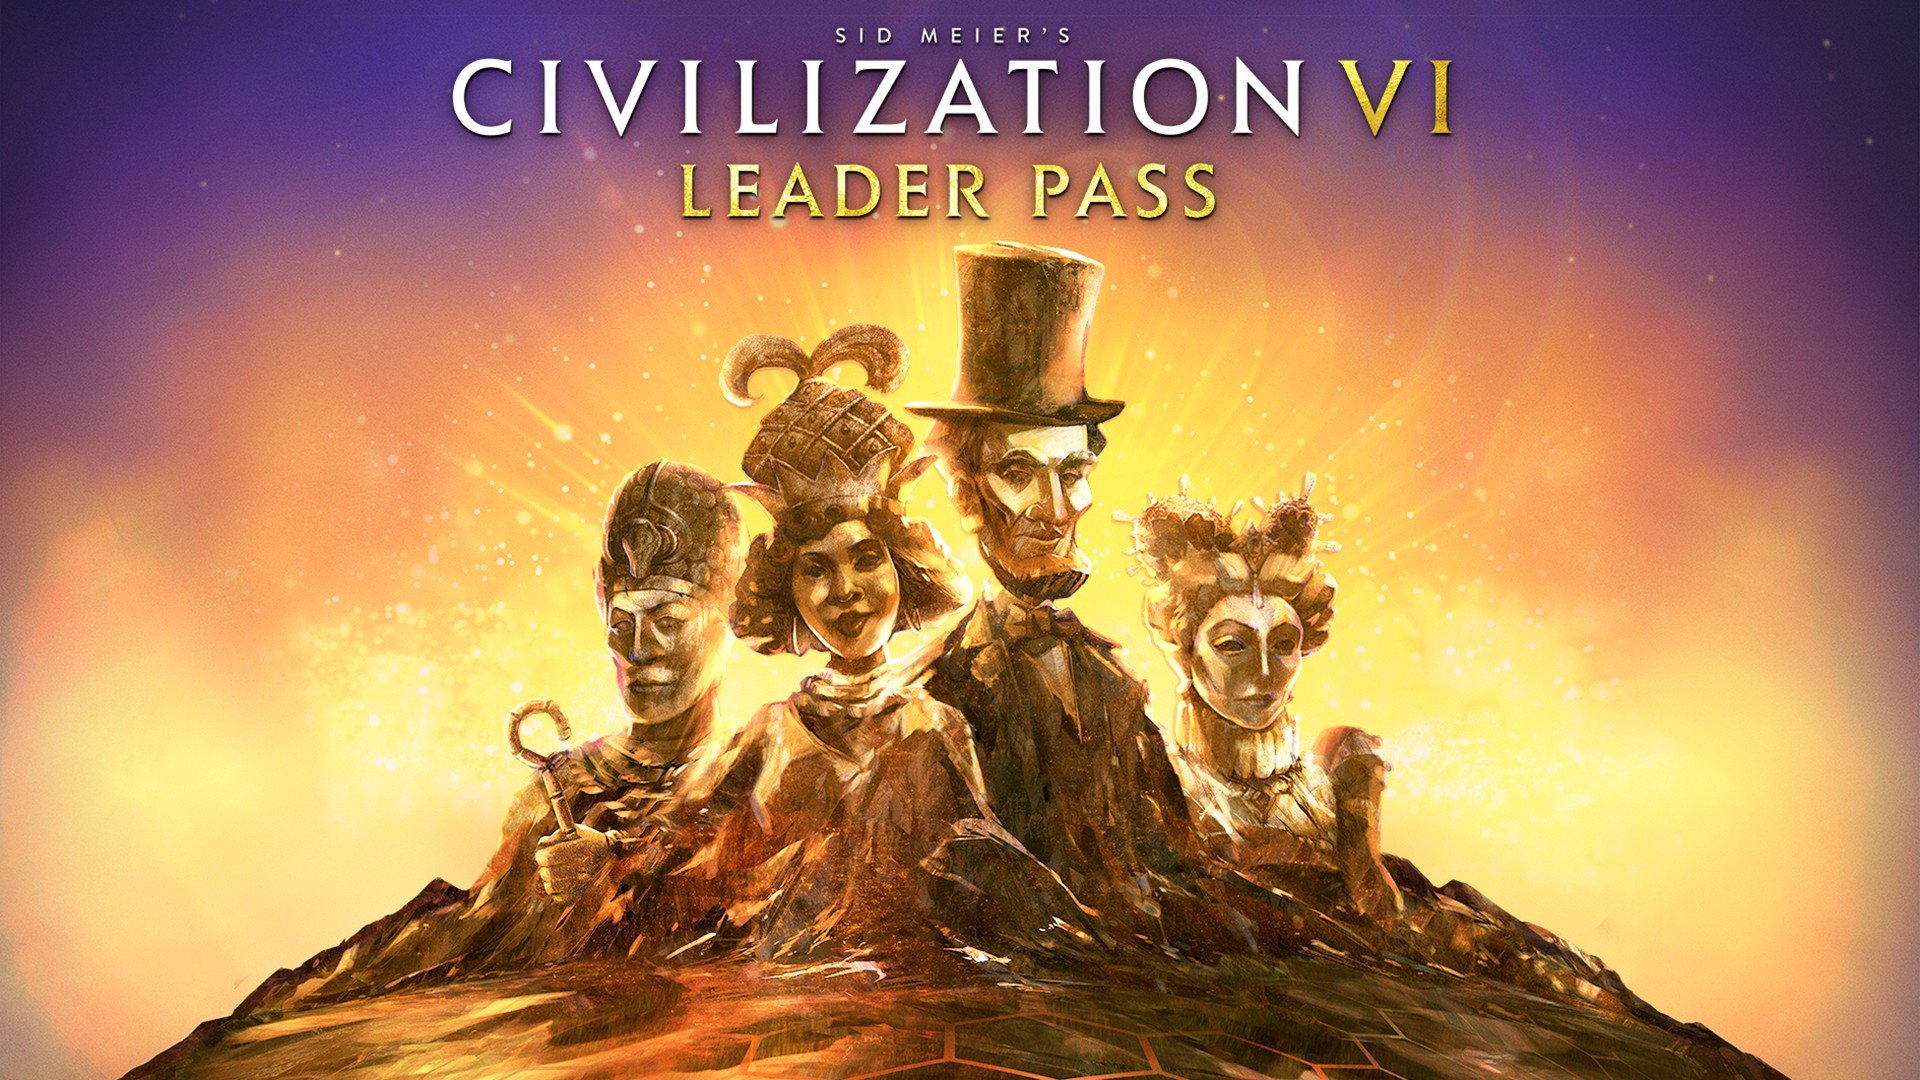 All Leader Pass Content Available Now On console – New August Update Also Released For Civilization VI